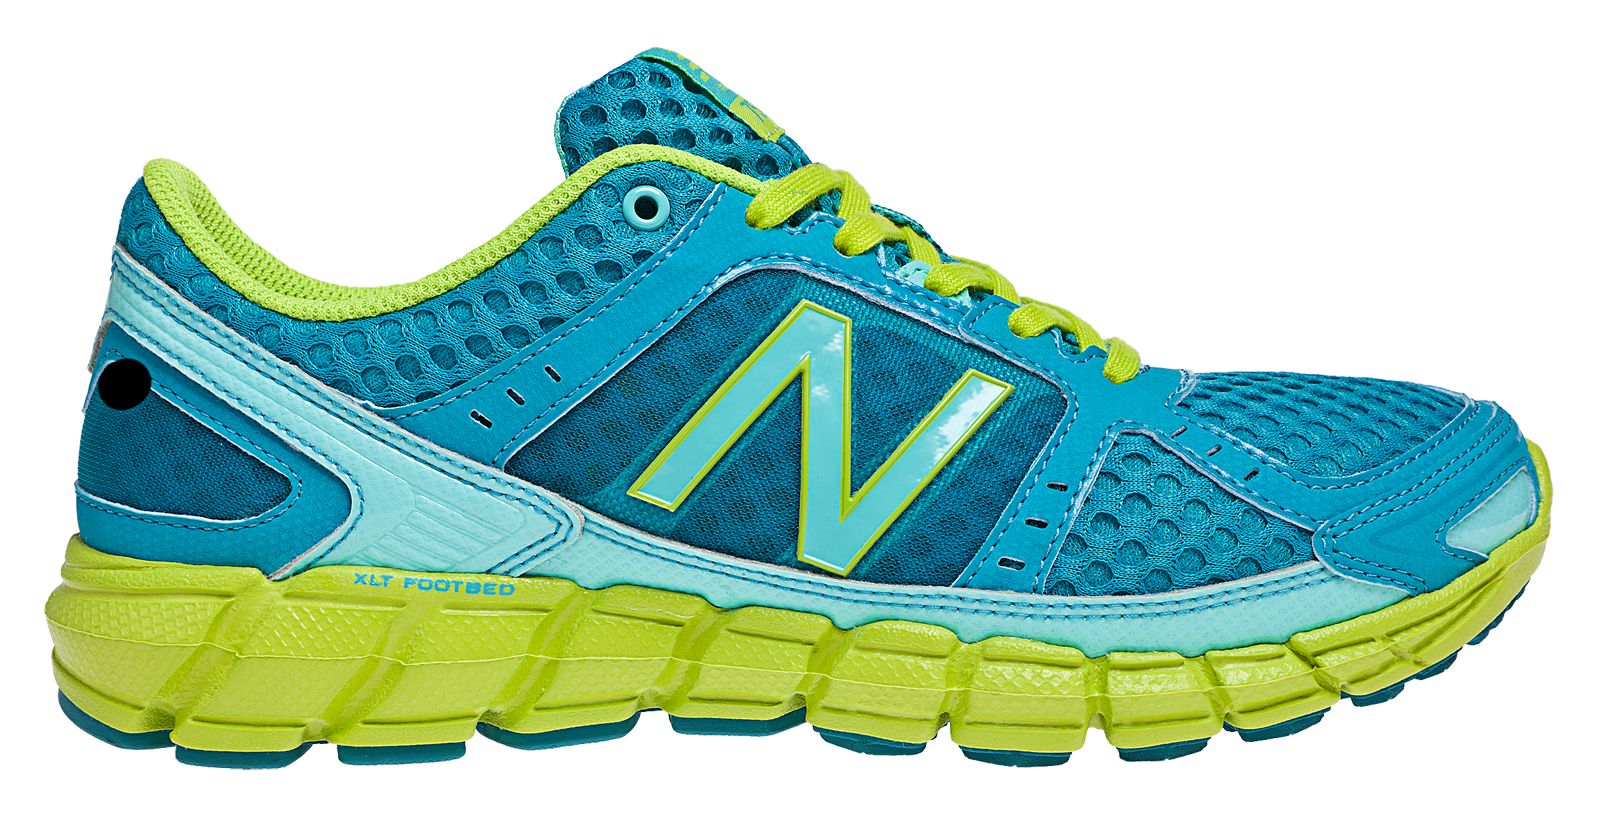 New Balance W750-V1 on Sale - Discounts Up to 33% Off on W750BB1 at Joe's New  Balance Outlet